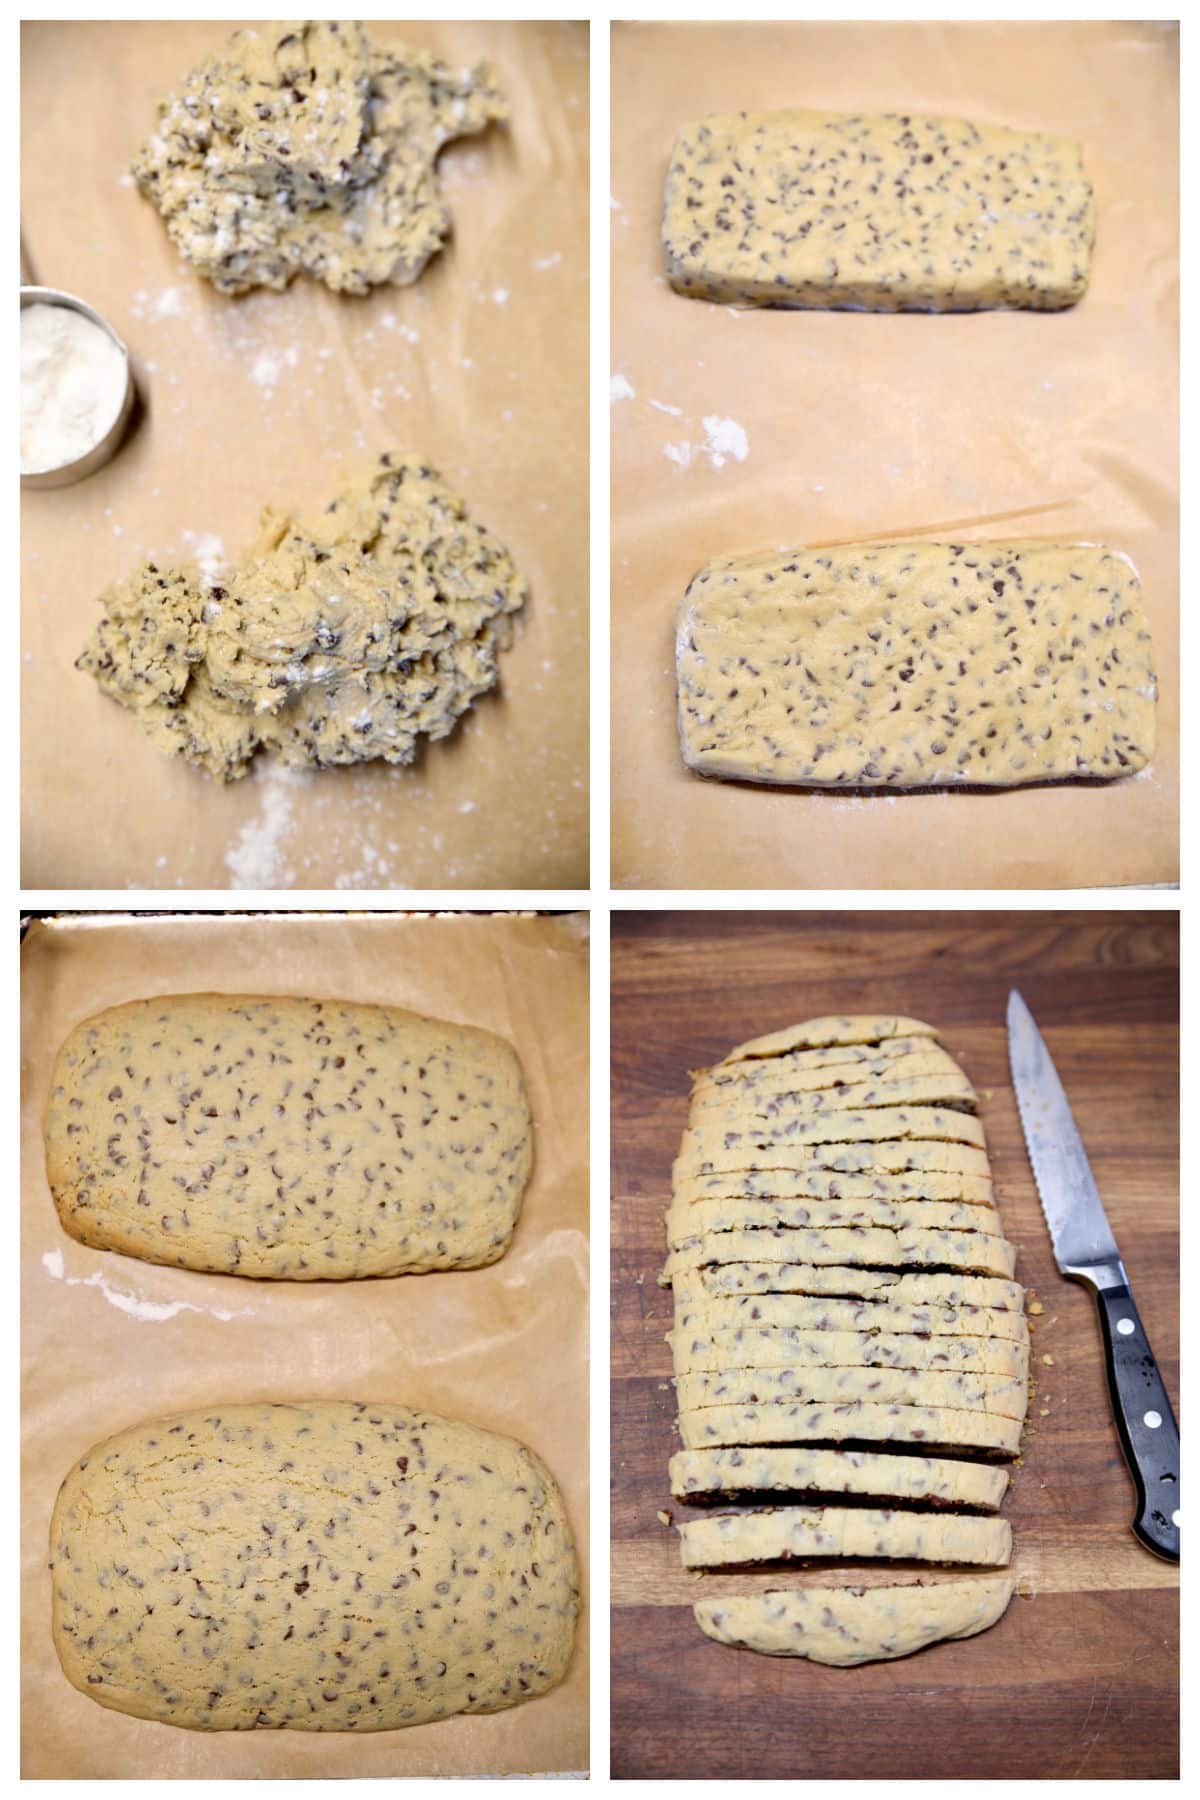 Collage shaping and baking biscotti.